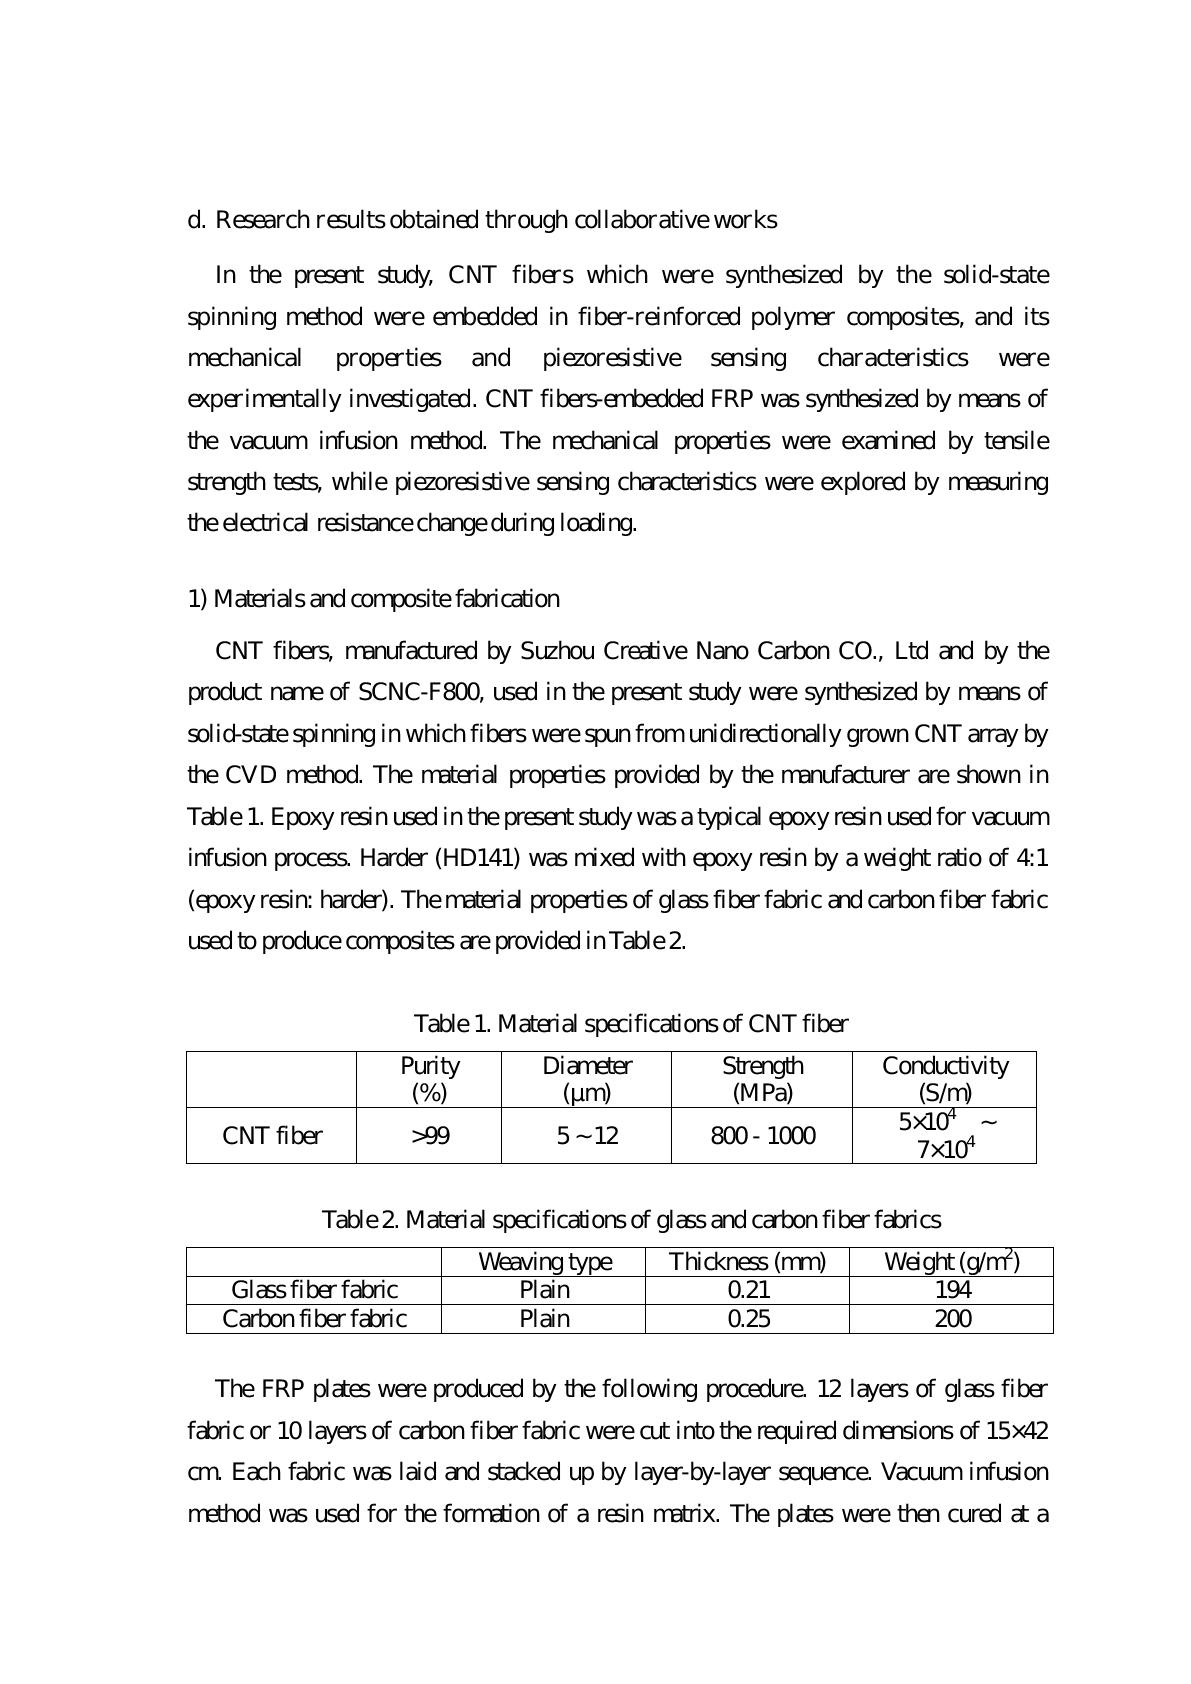 Material specifications of CNT fiber Purity Diameter Strength Conductivity